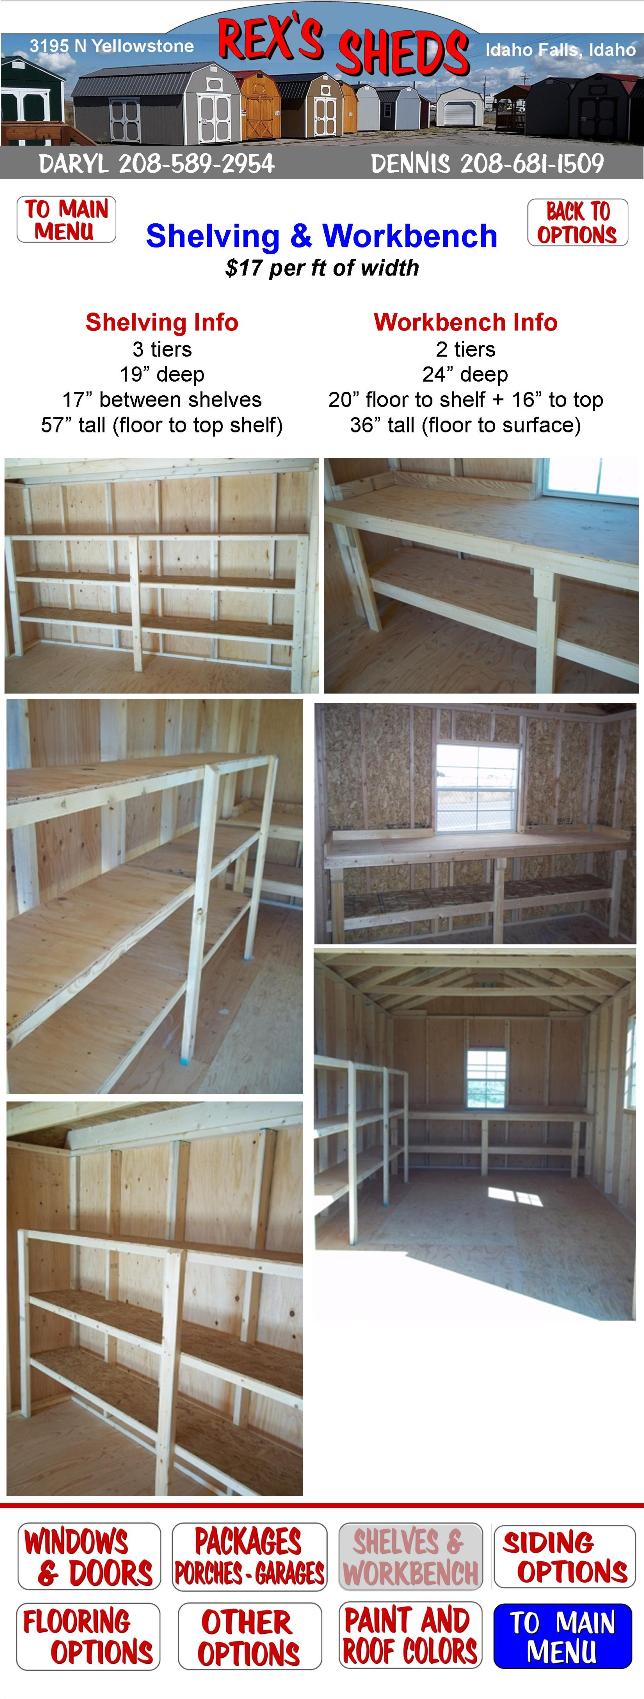 image_of_shelving_and_work_bench_inside_shed_with_pricing_listed